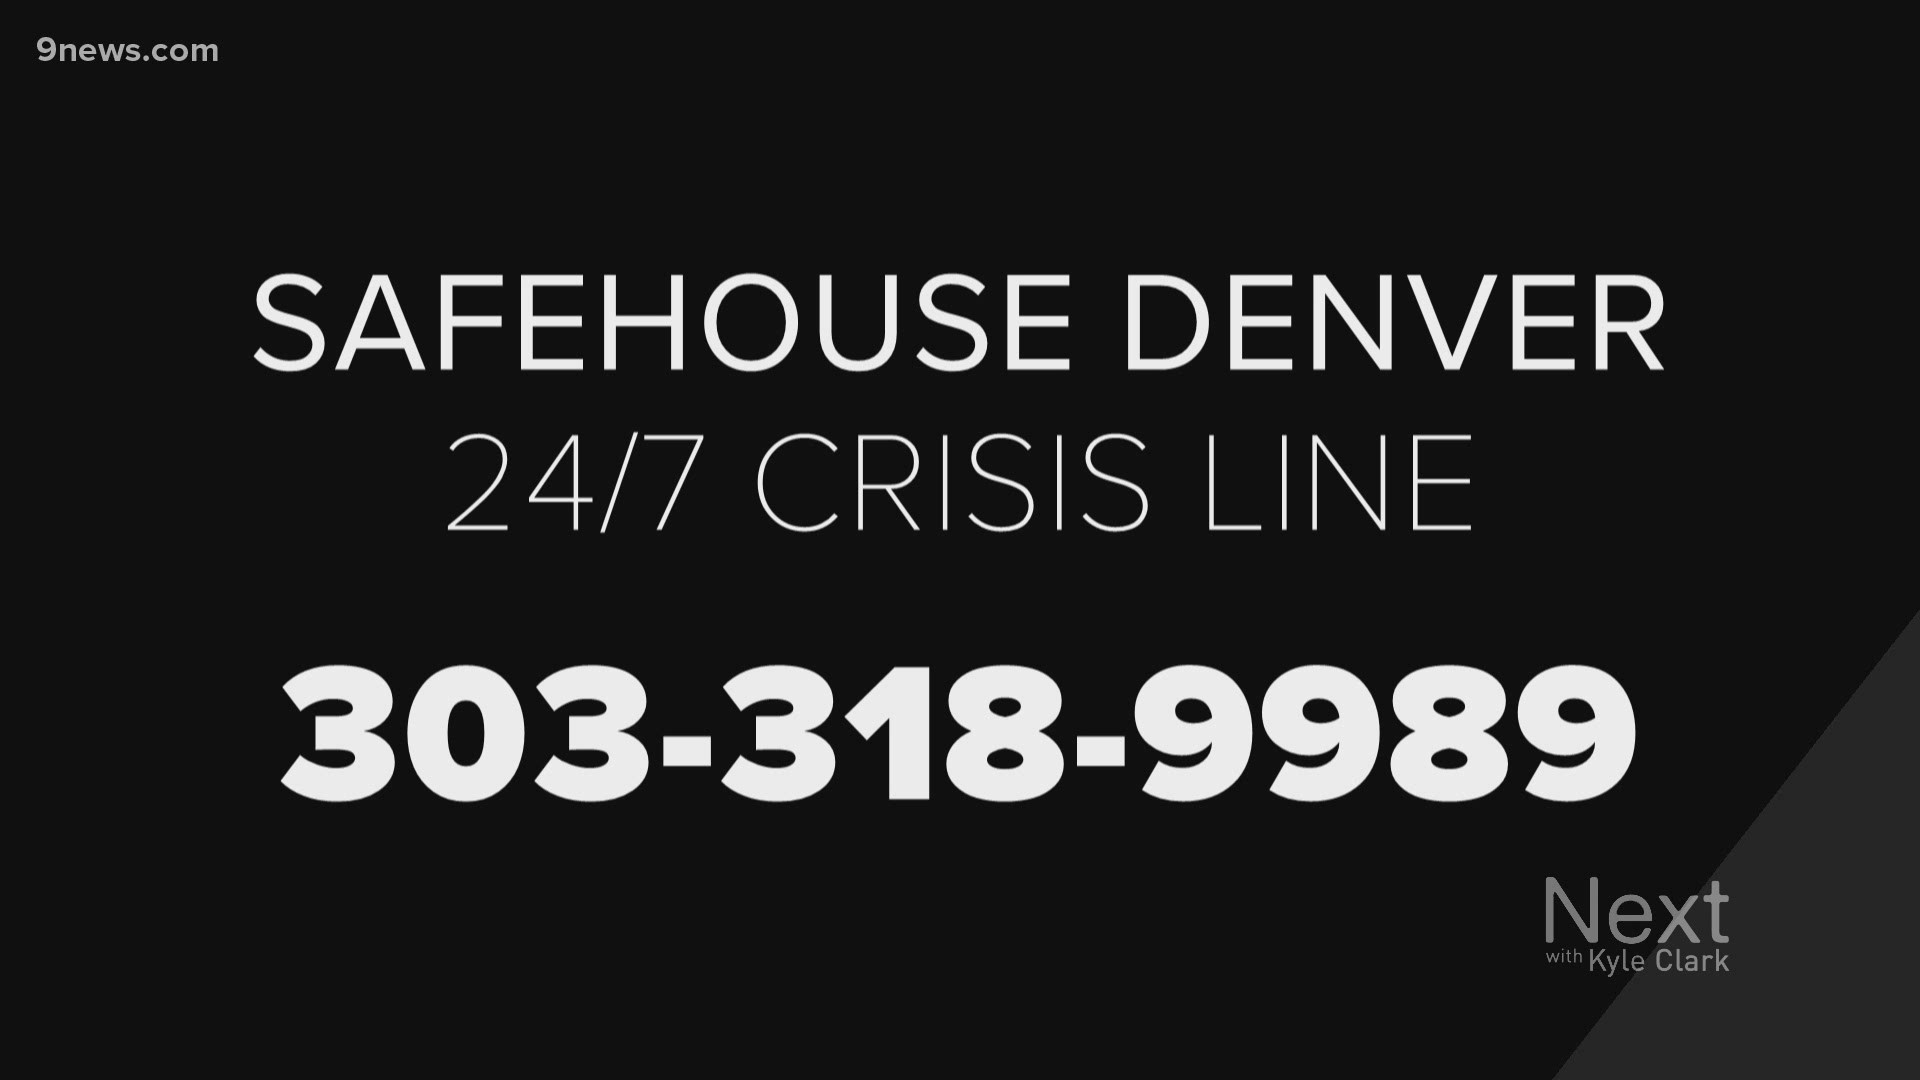 SafeHouse Denver says domestic abuse seems to have become more severe during the pandemic based on crisis line calls, but they're losing money.